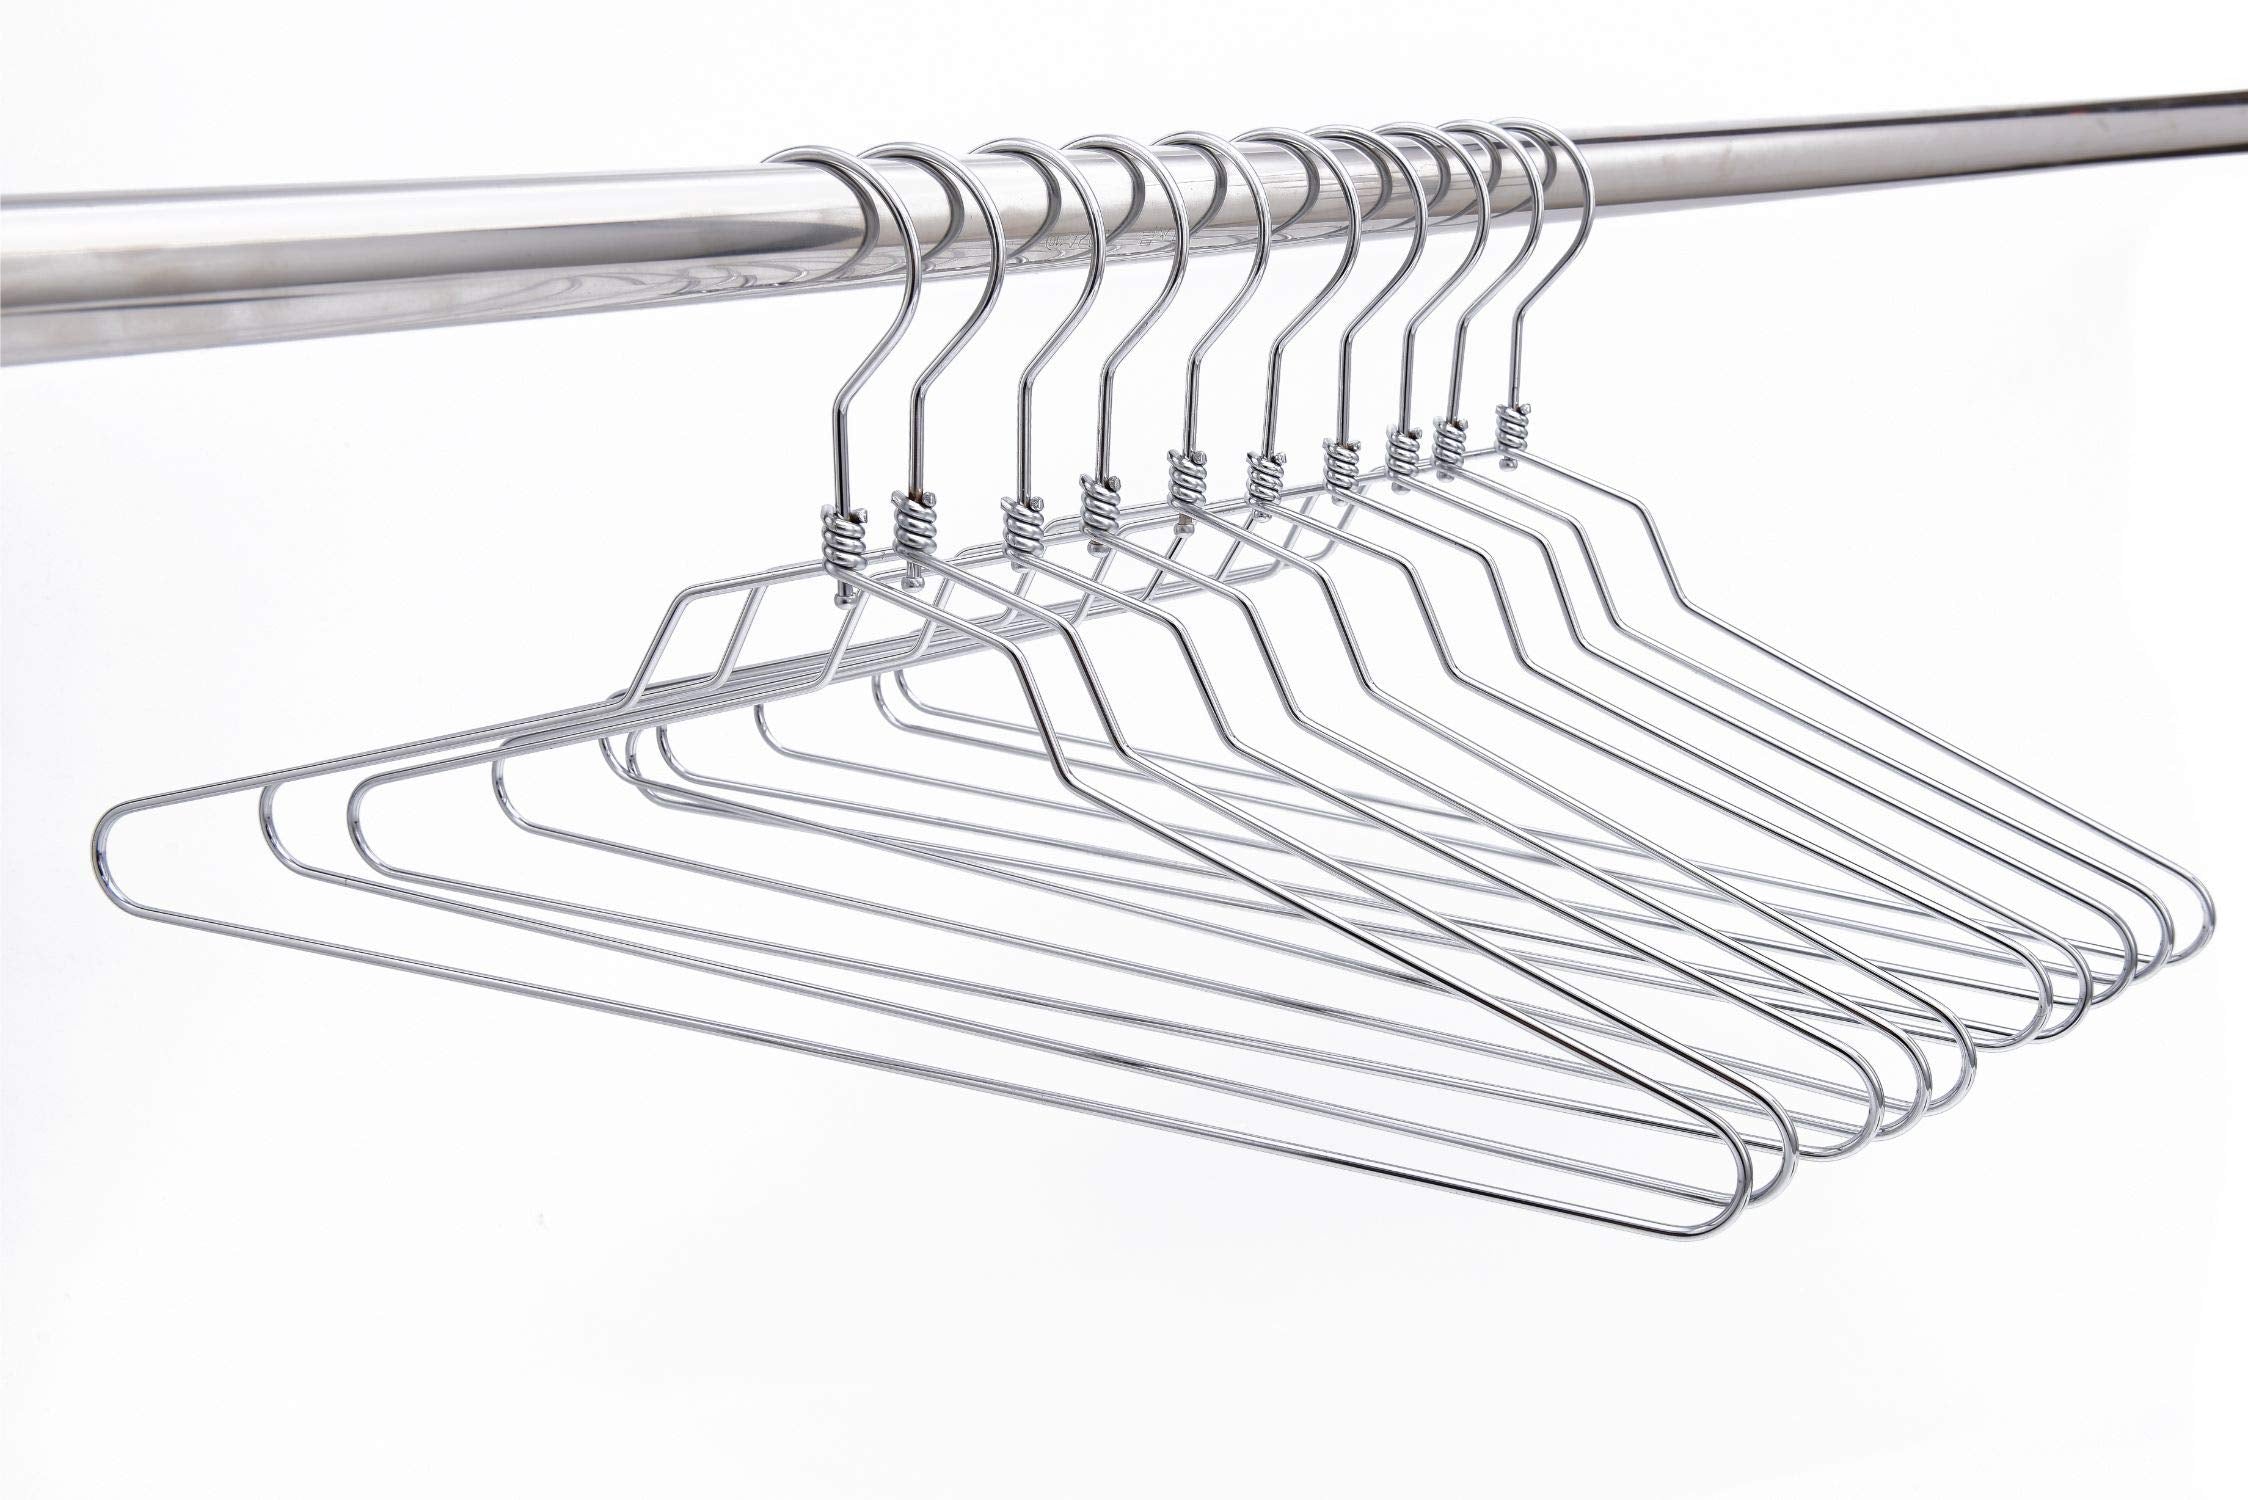 10 Quality Metal Hangers, Swivel Hook, Stainless Steel Heavy Duty Wire Clothes Hangers (10, Standard - 17" inch)  - Acceptable